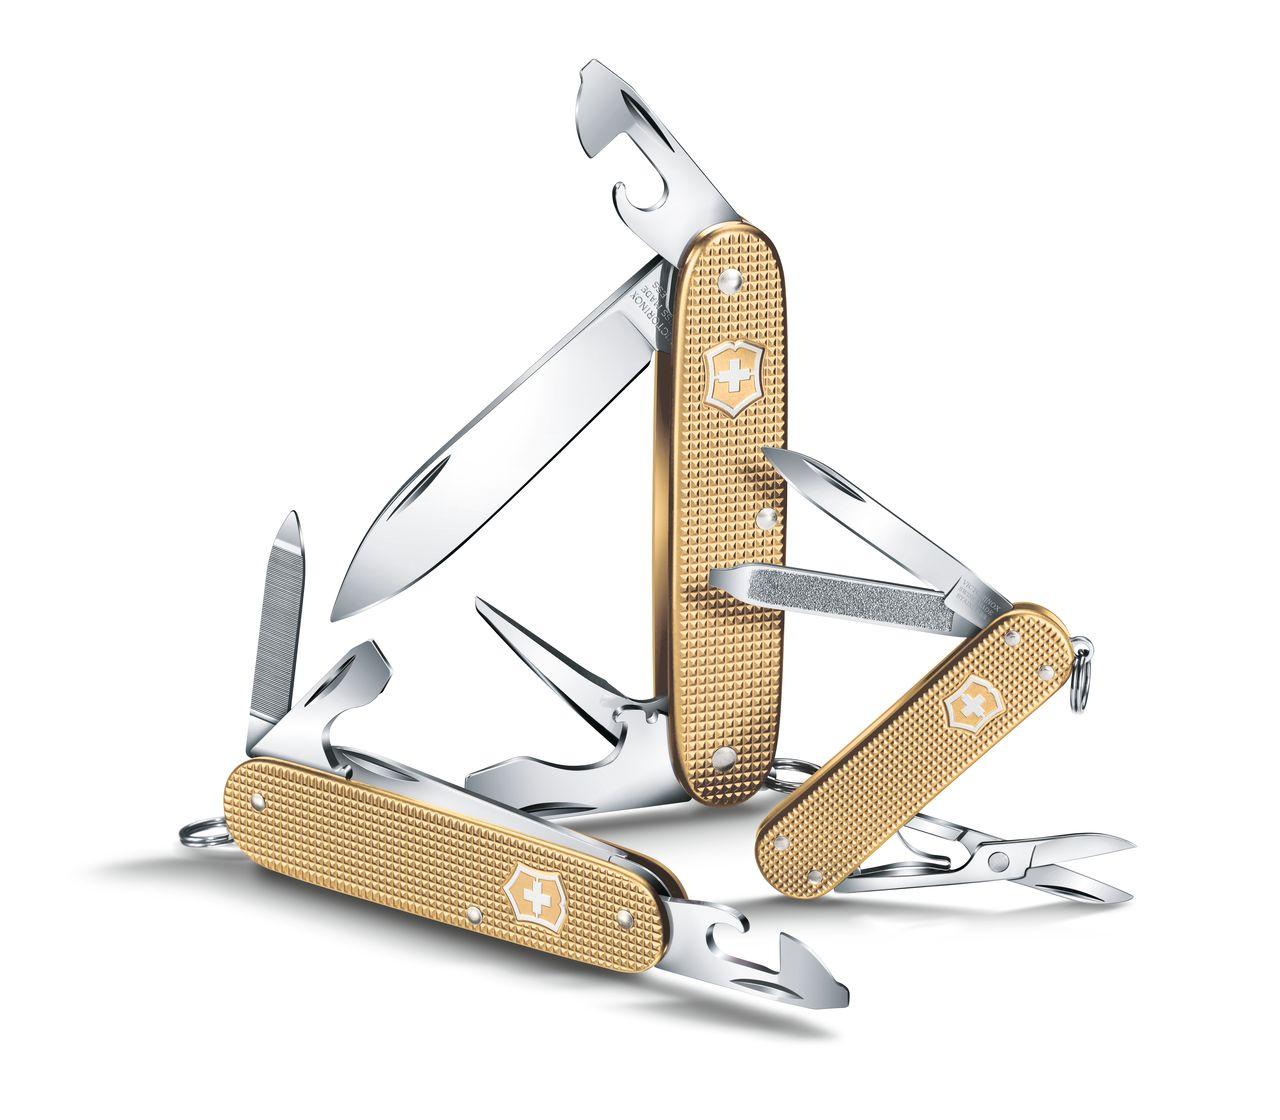 Victorinox Taschenmesser Pioneer Alox Champagner Gold Limited Edition 2019 